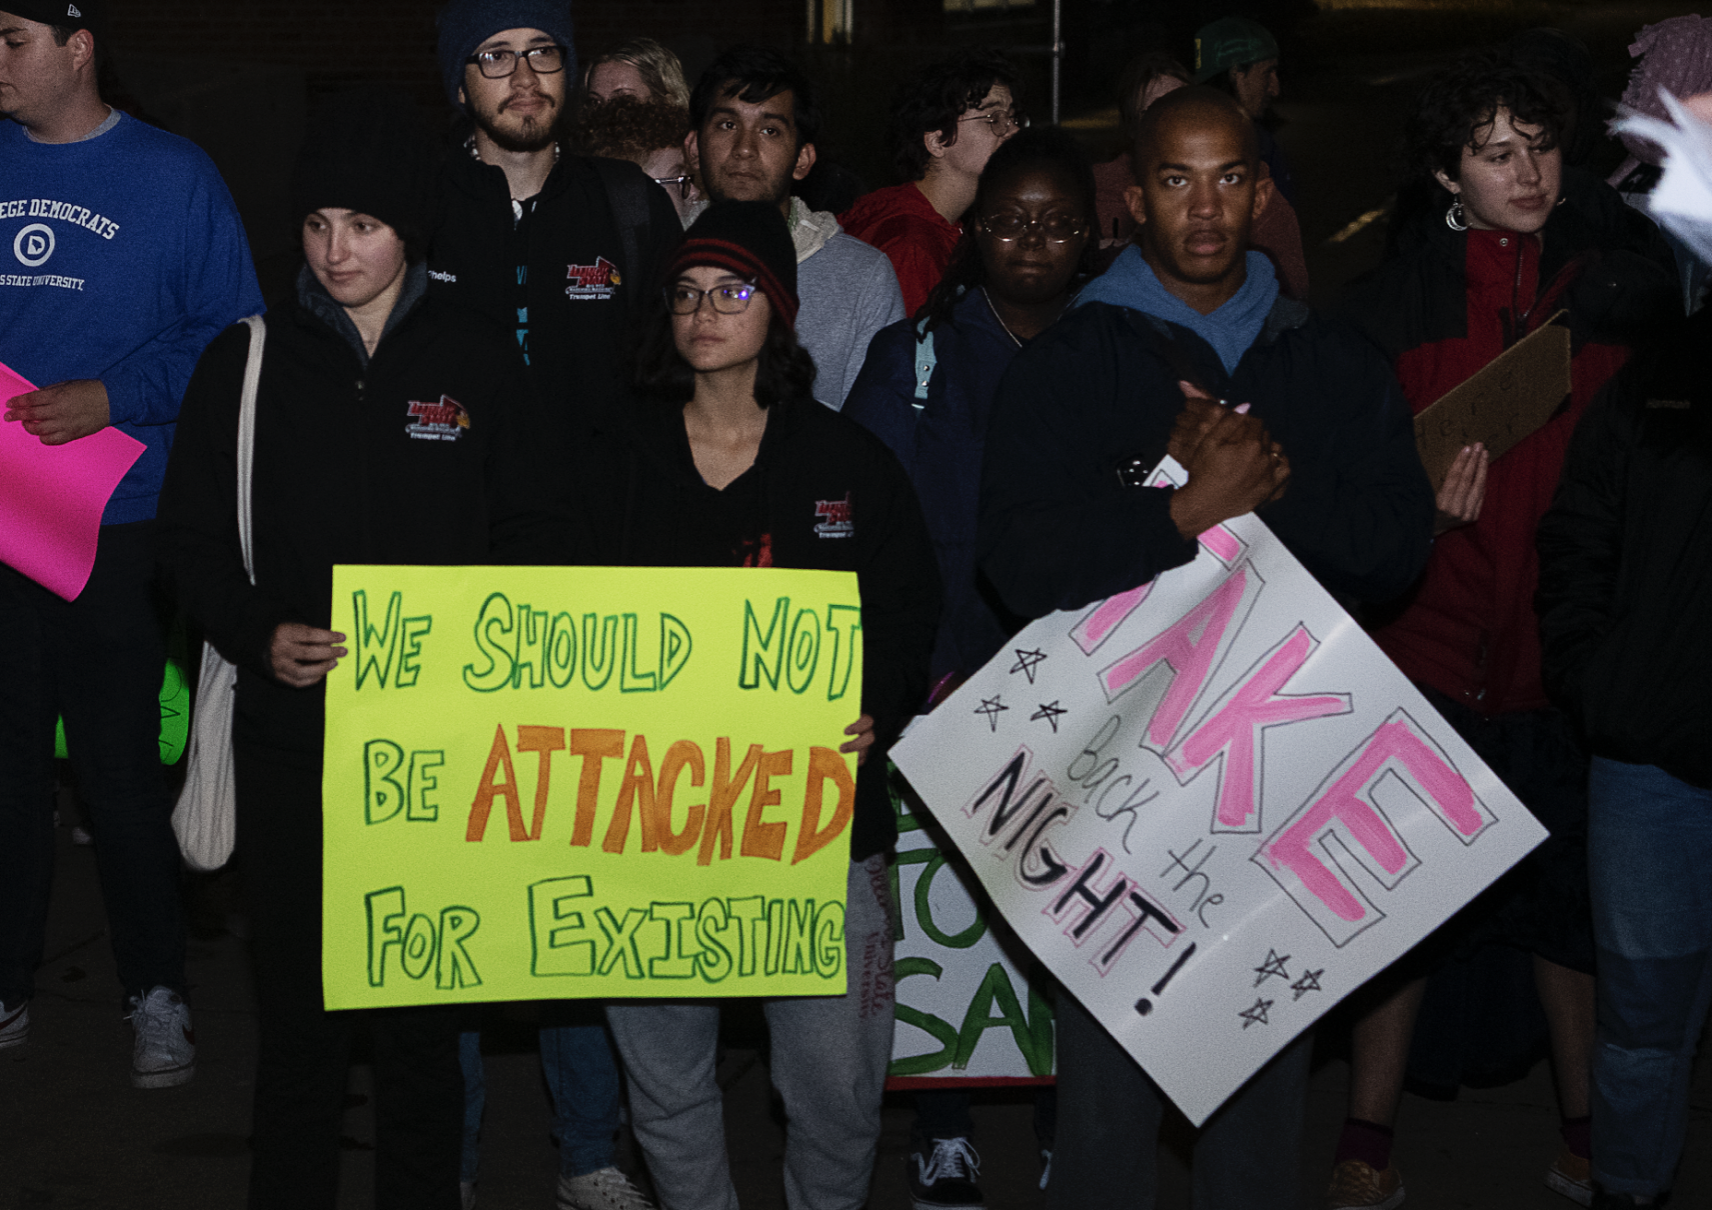 ISU students Take Back the Night to protest sexual violence with rally, march News videtteonline image